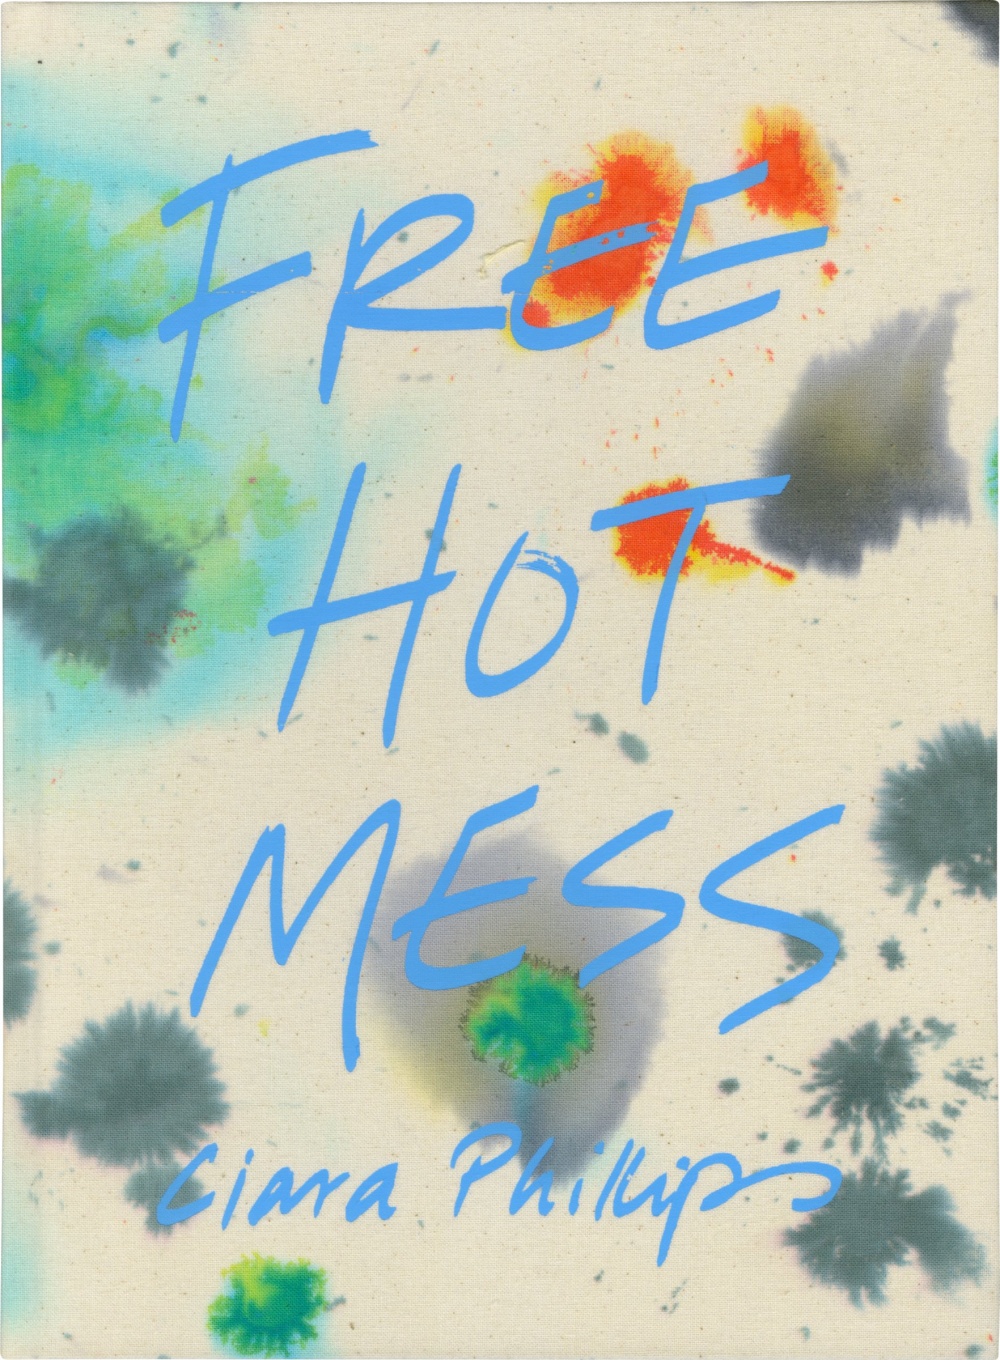 Free Hot Mess (unique hardcover edition)